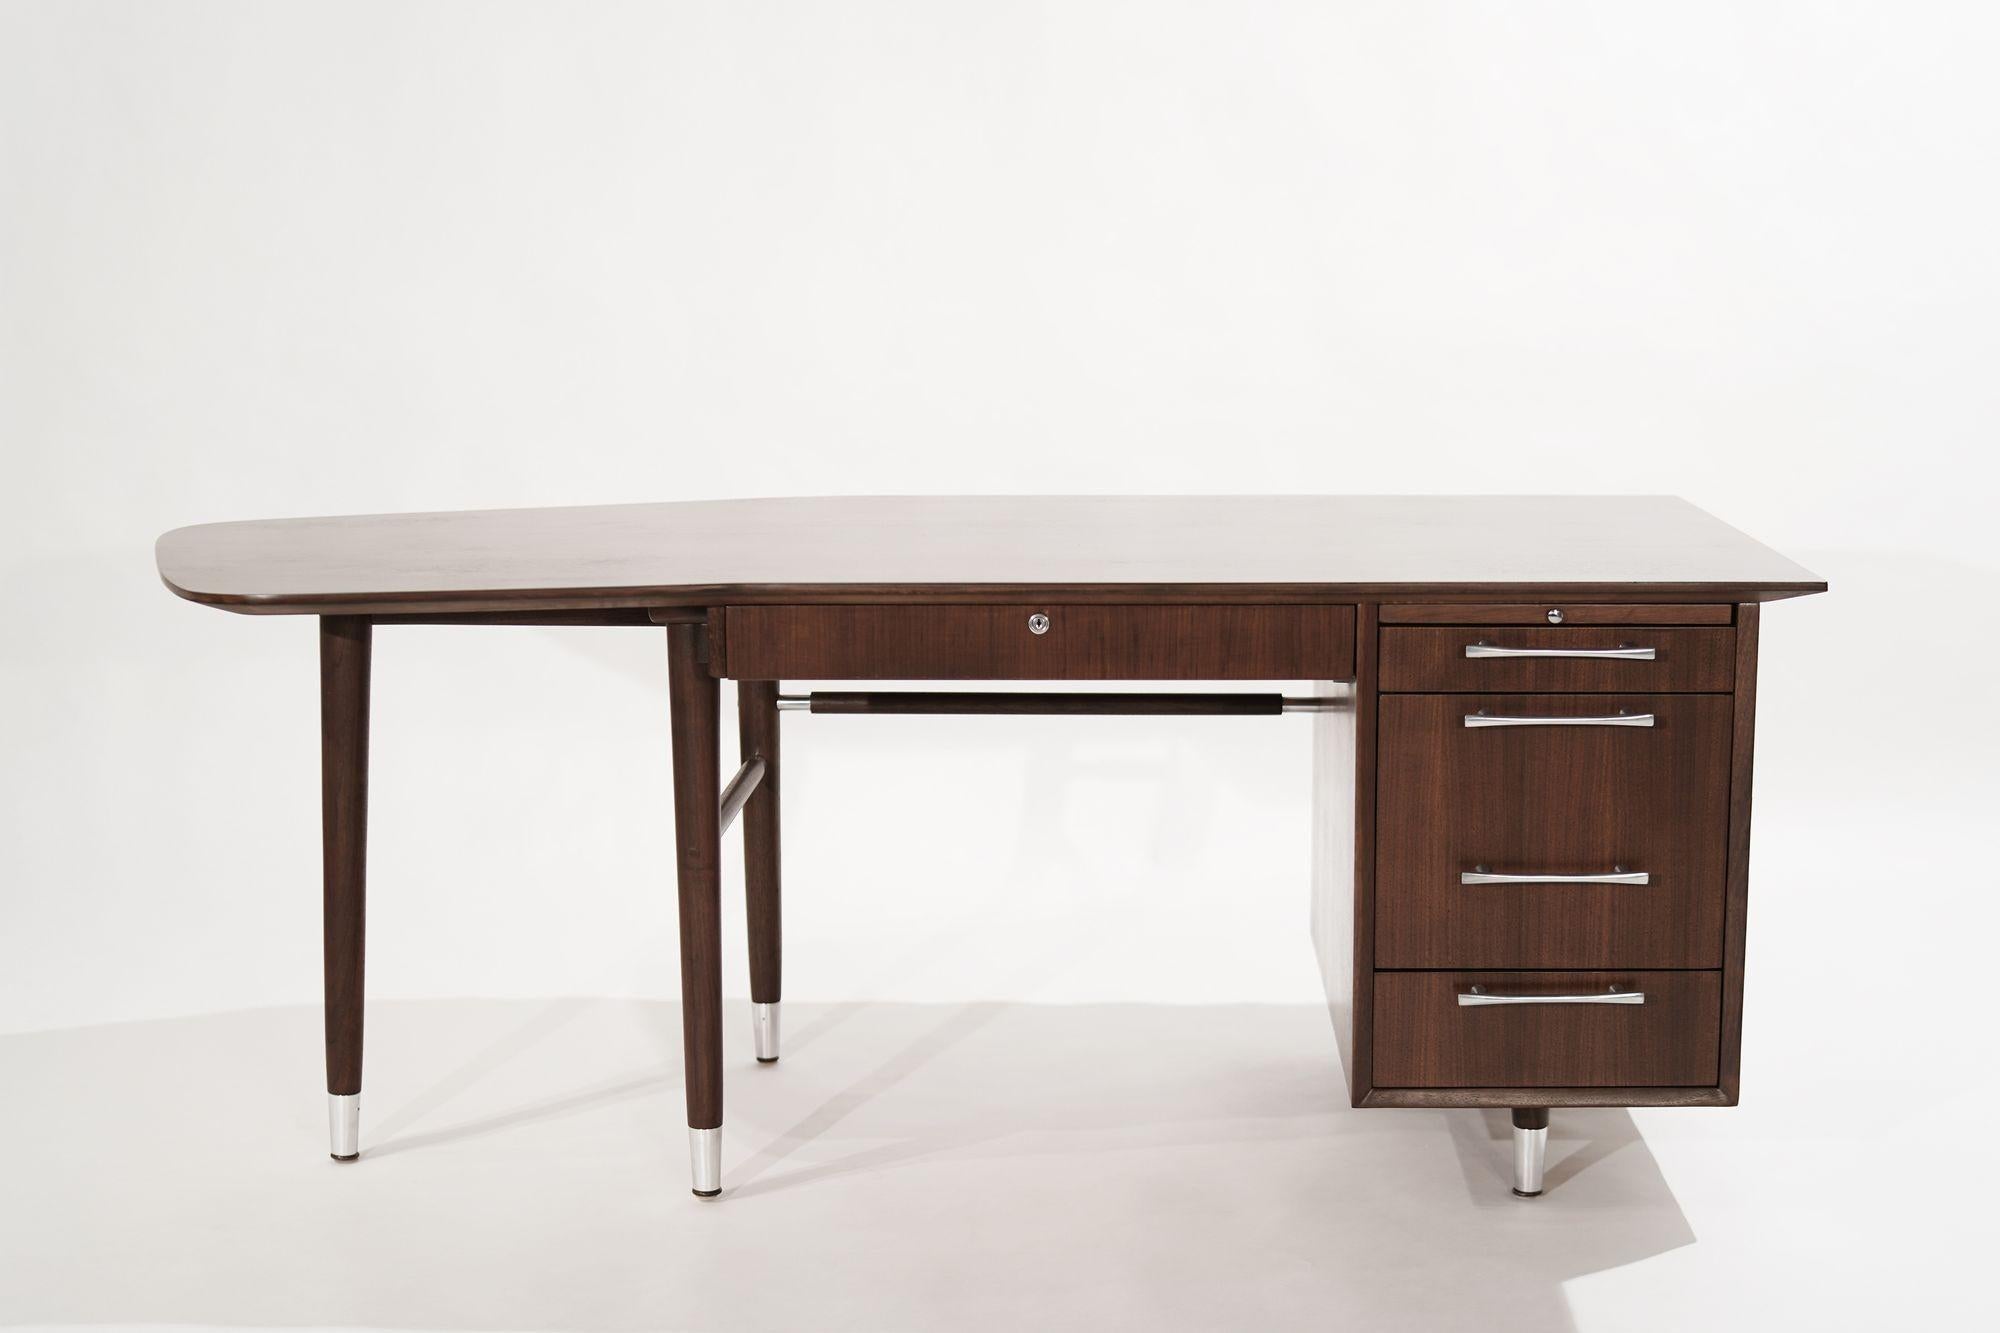 An asymmetric desk executed in walnut, featuring walnut stretchers, nickel hardware, and accents, circa 1950-1959. Completely restored to its original finish, topped with our scratch/water-resistant finish.
 
Other designers from this period